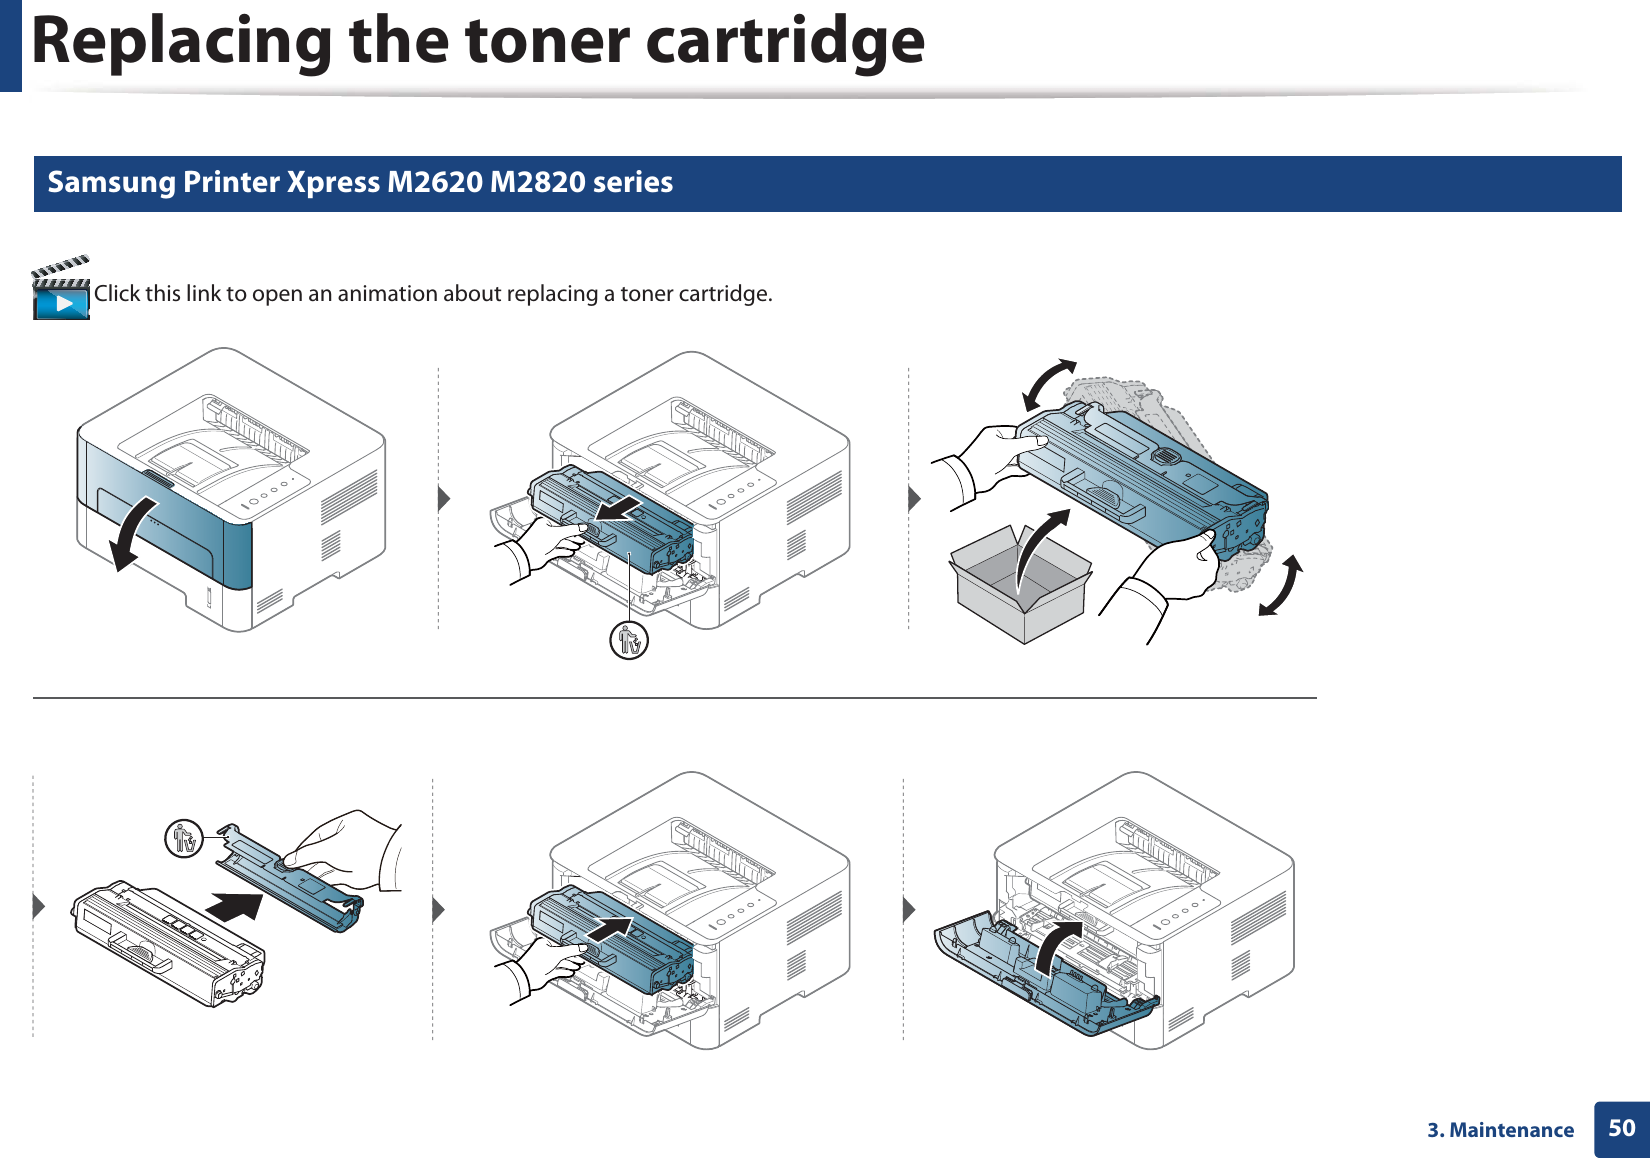 Replacing the toner cartridge503. Maintenance6 Samsung Printer Xpress M2620 M2820 series Click this link to open an animation about replacing a toner cartridge.